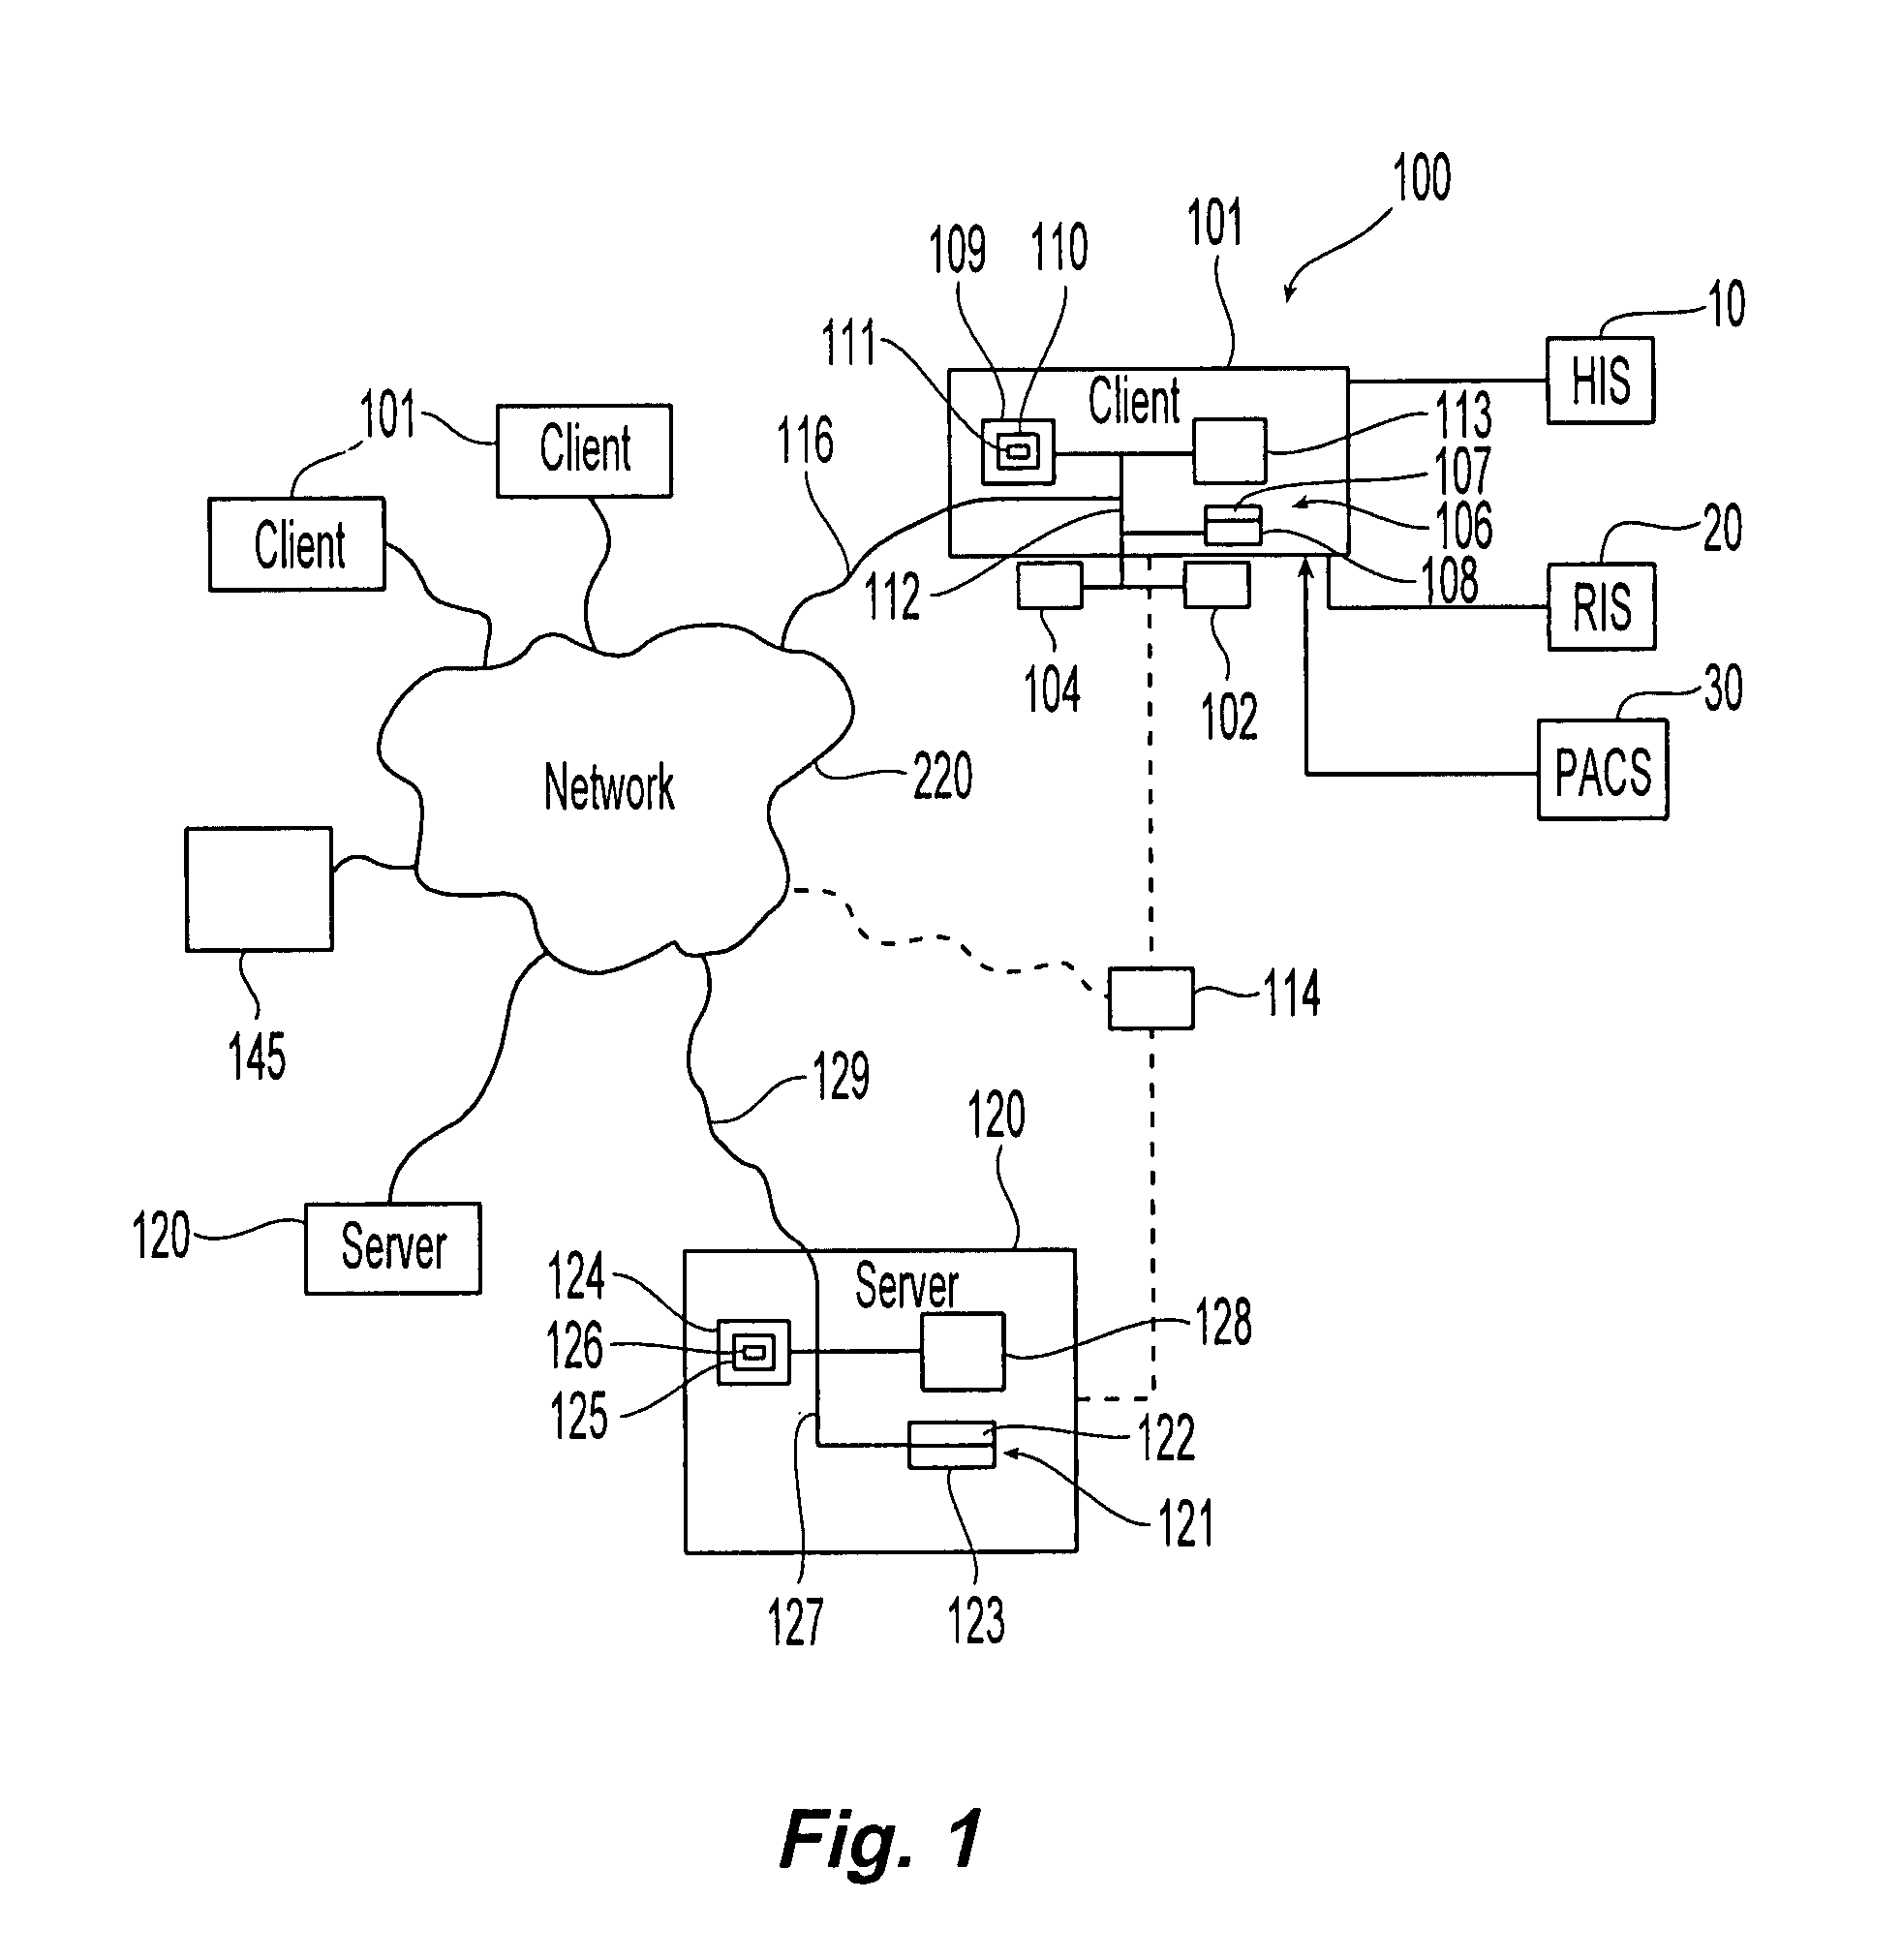 Method and apparatus for adapting computer-based systems to end-user profiles